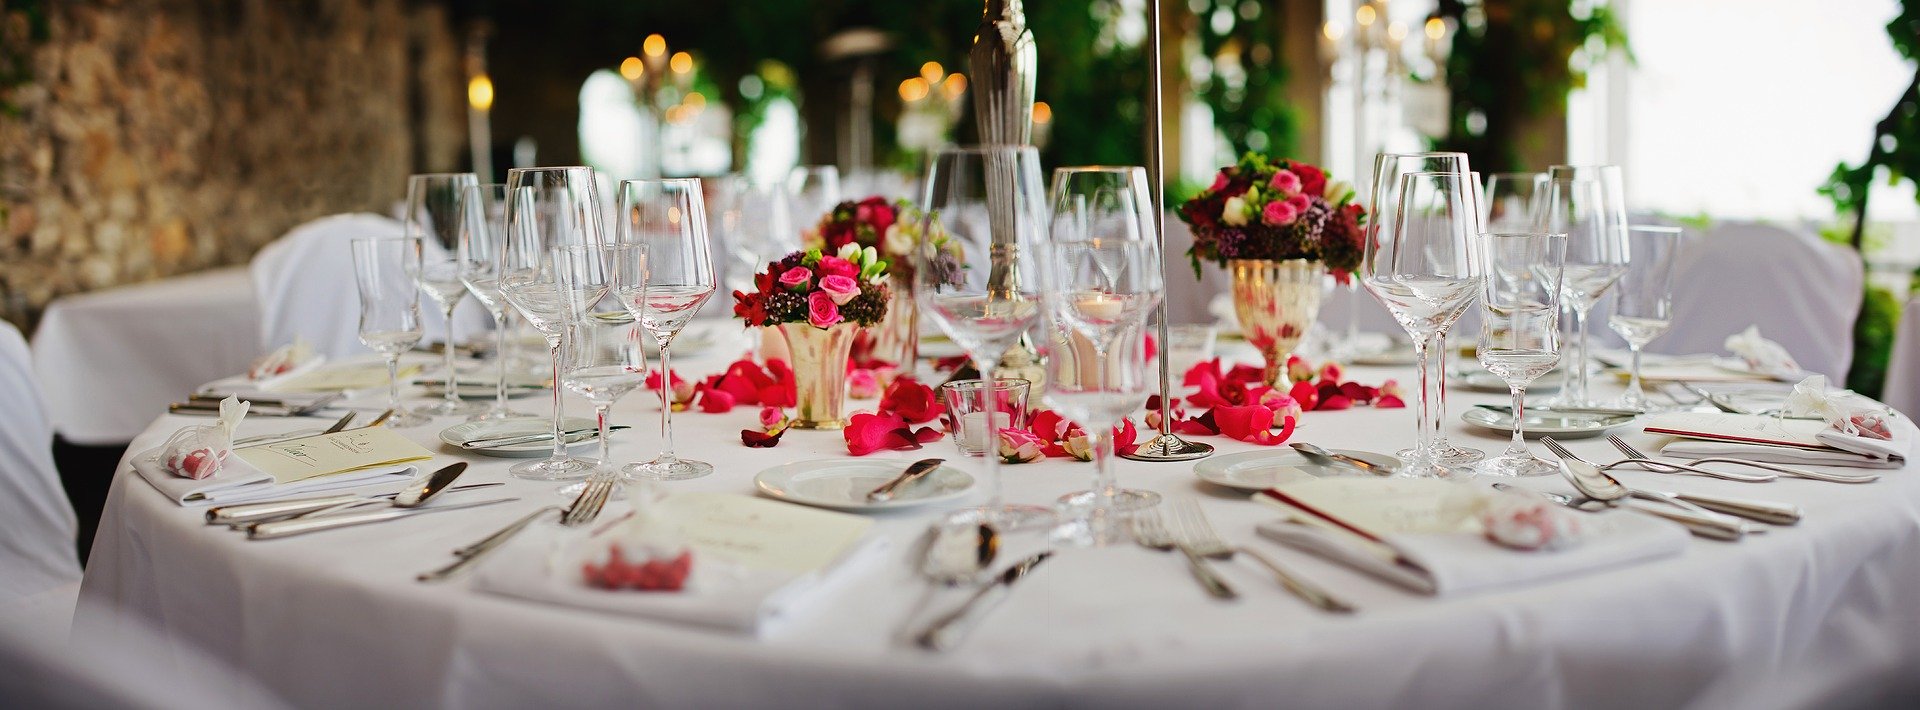 5 Tips to Plan a Successful Wedding Event Themes and Venues